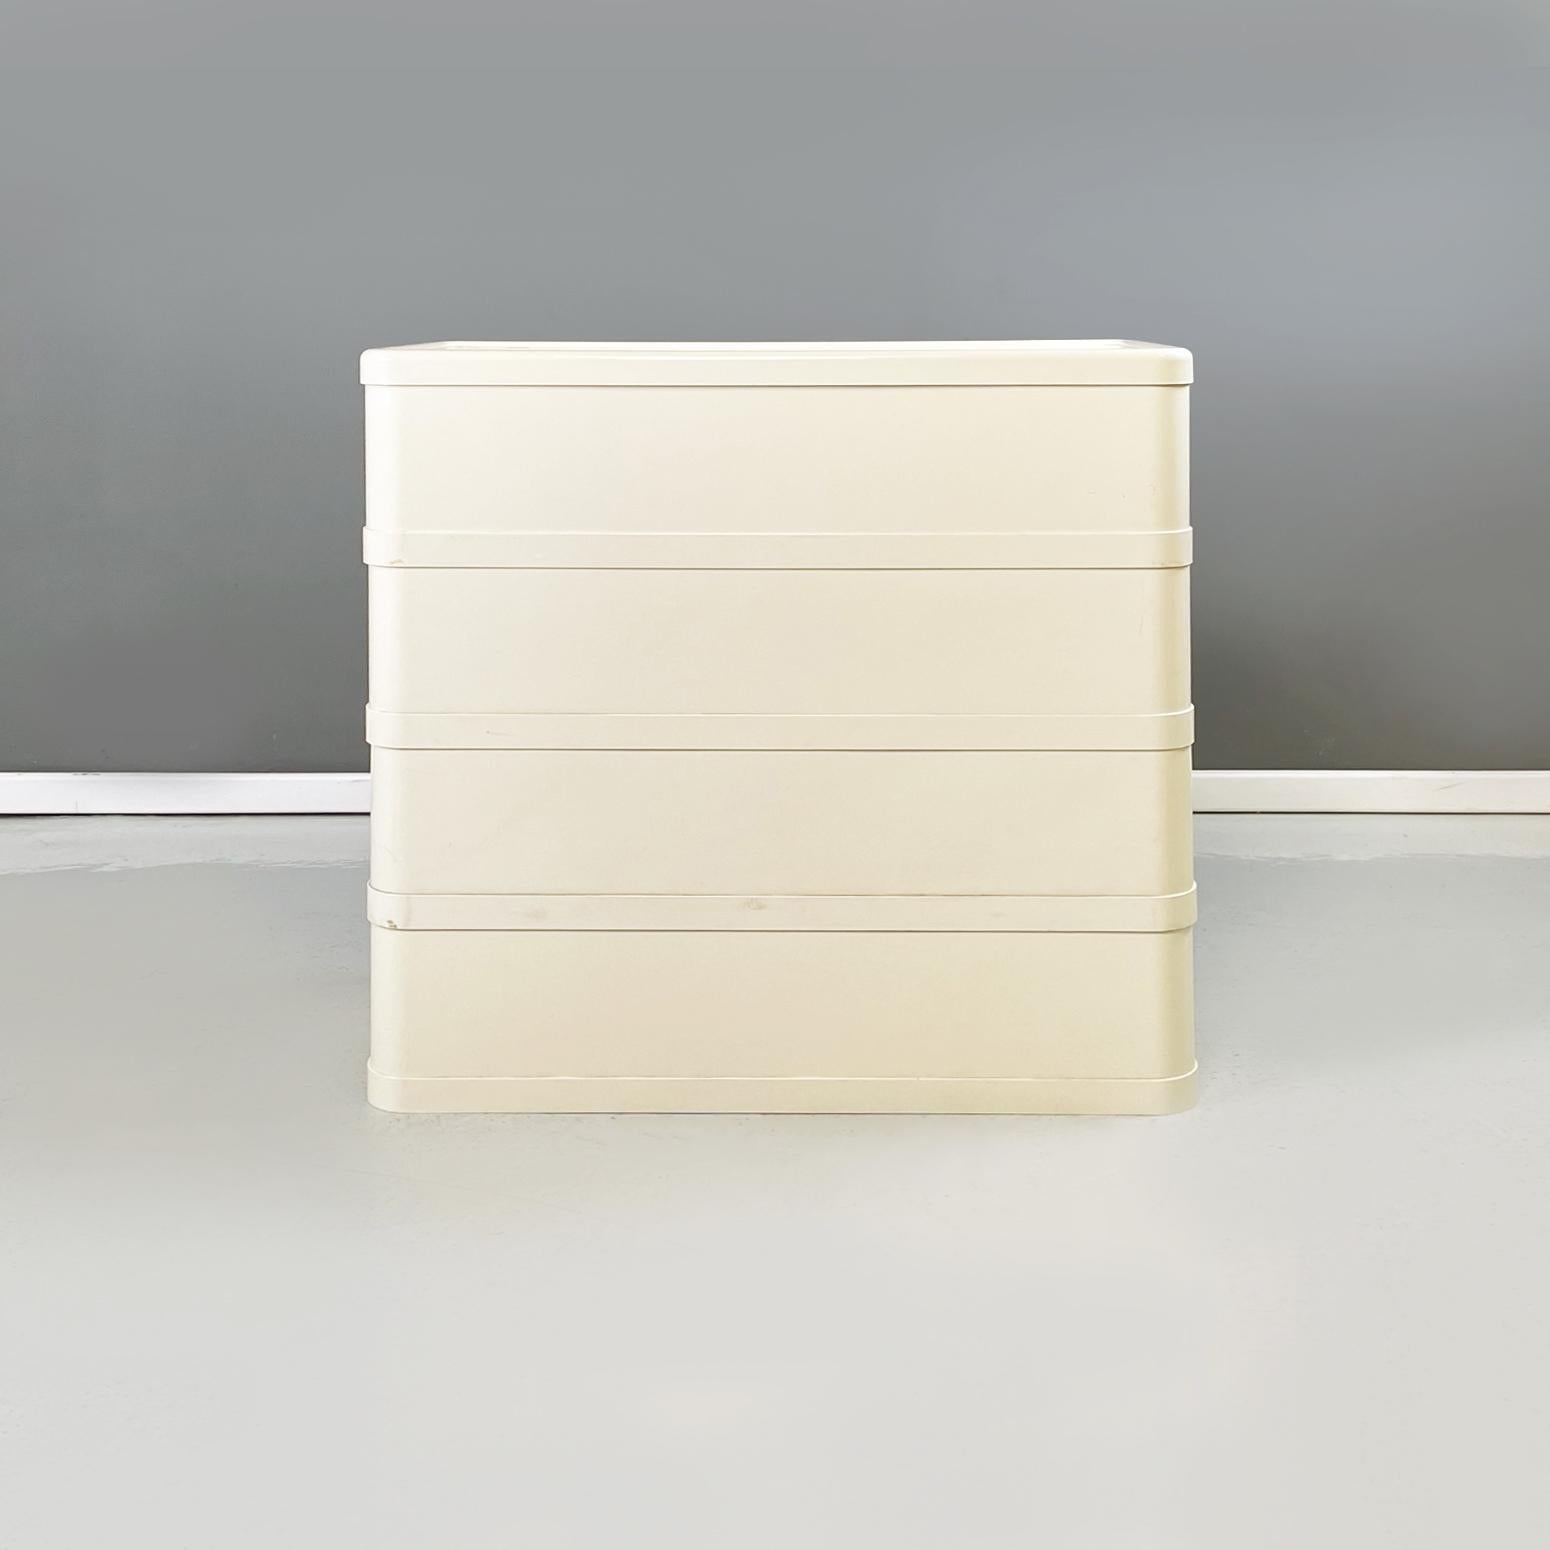 Late 20th Century Italian Space age white modular chest of drawer 4964 Olaf Von Boh Kartell 1970s For Sale